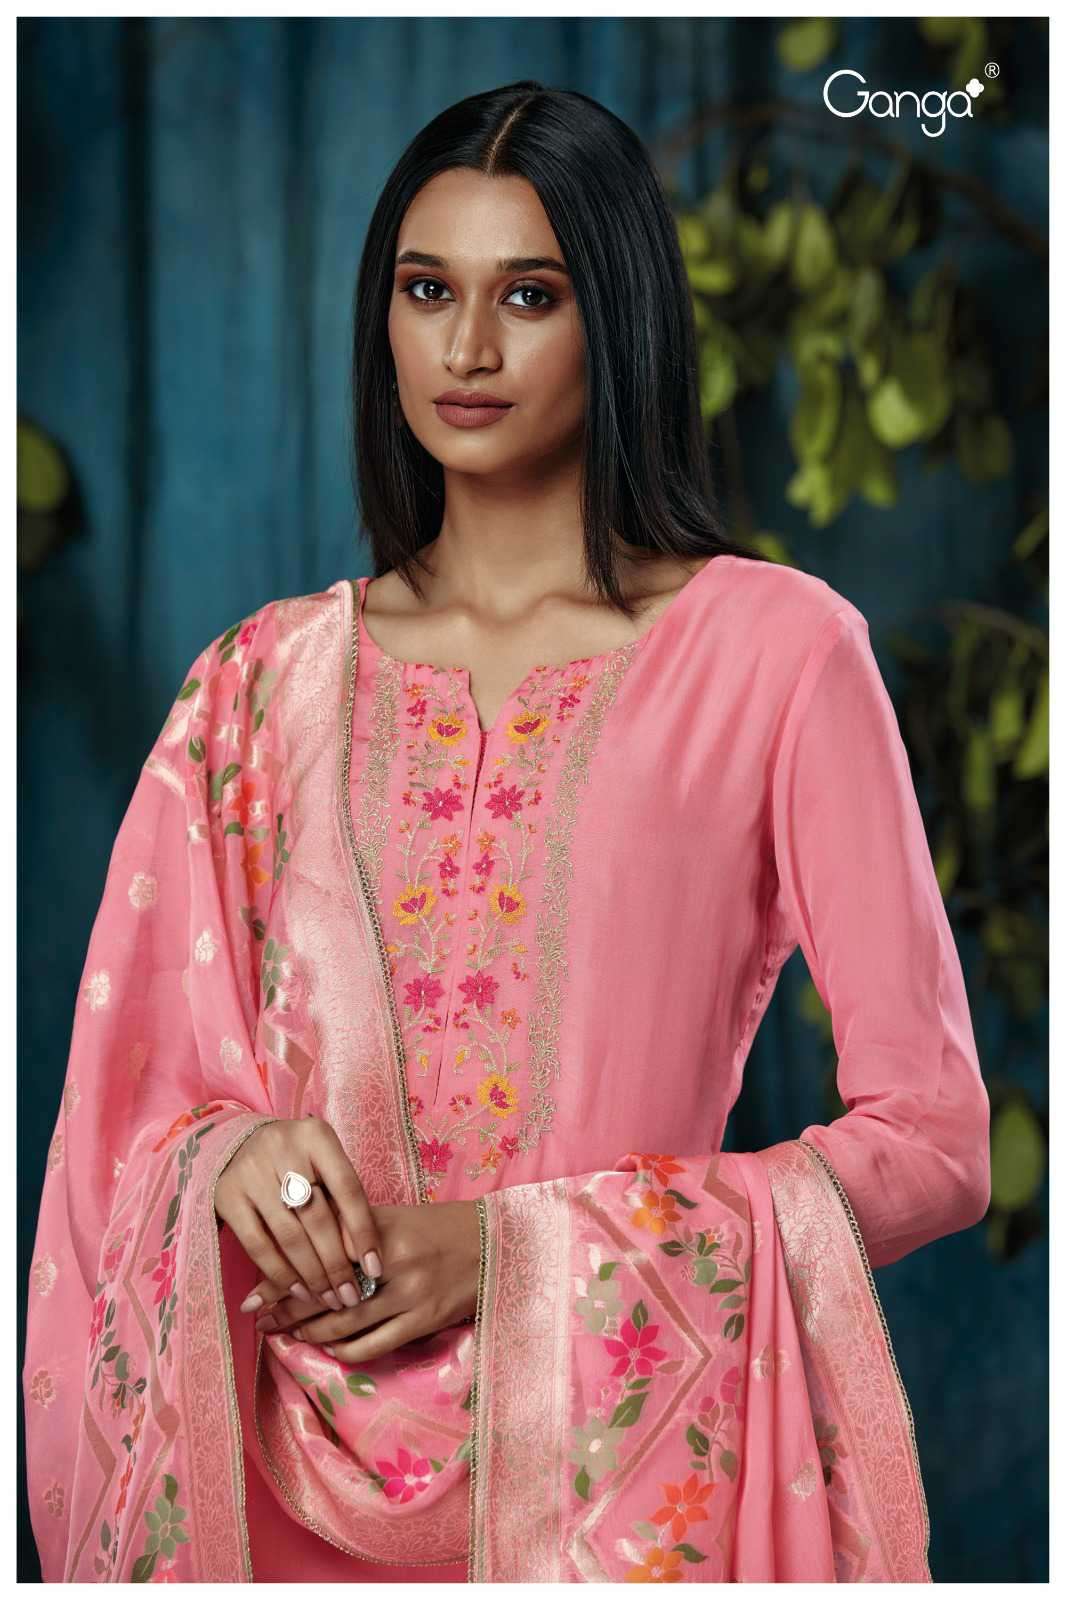 Buy Online Unstitched Suits For Women in Alluring Designs – Orient